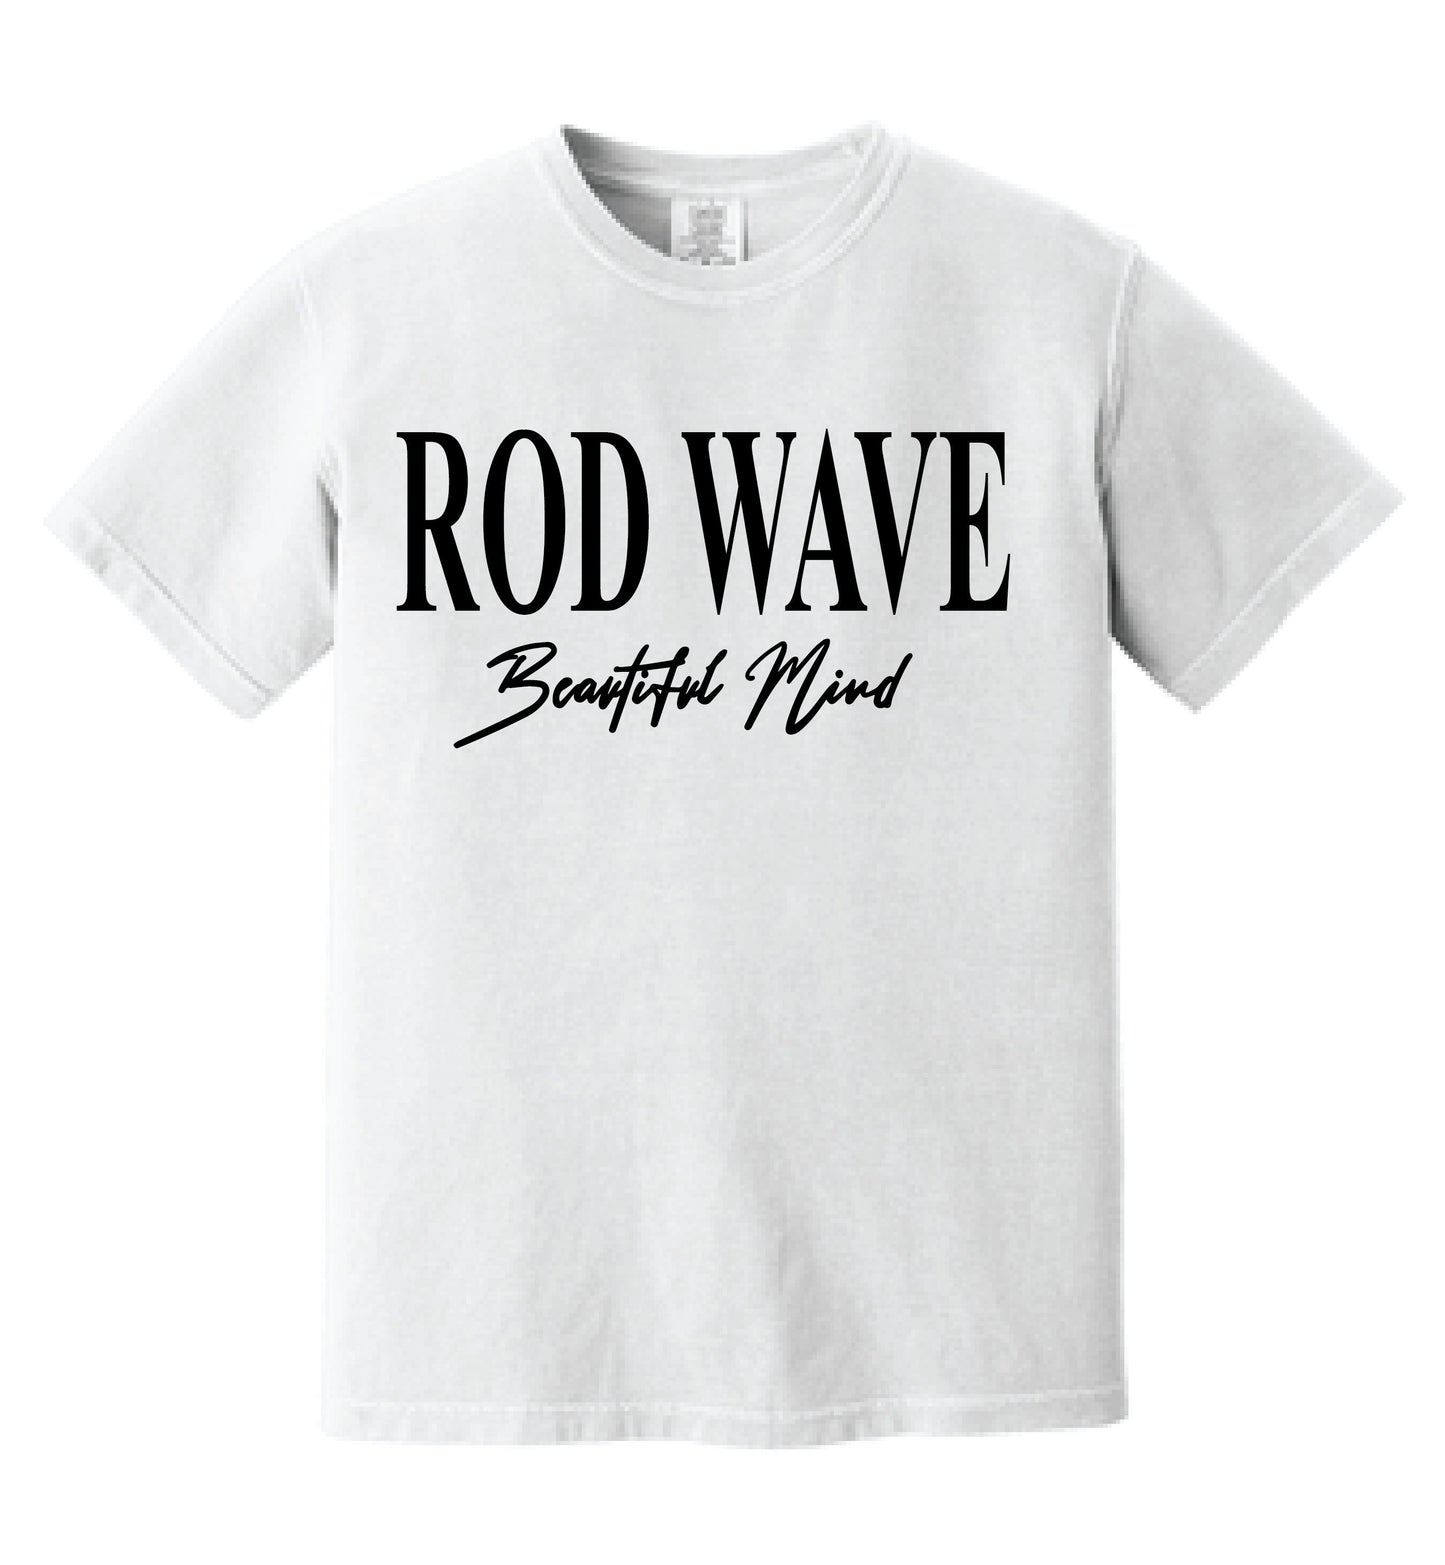 Rod Wave Beautiful Mind T-shirt - Embrace the Music and Message